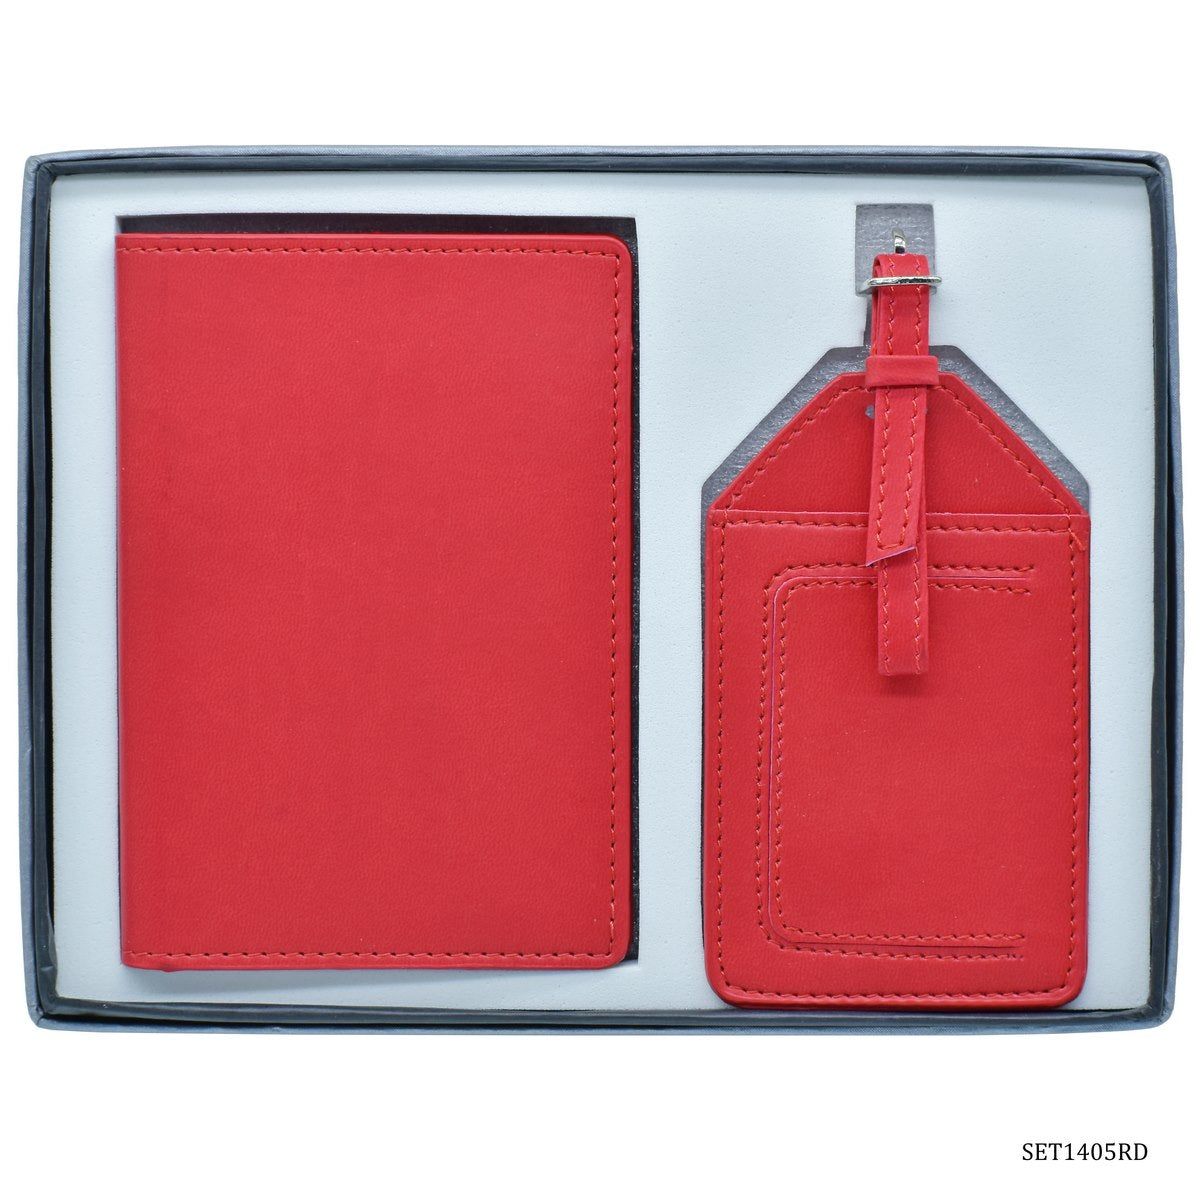 jags-mumbai Household Goods "Travel in Style with the 2-in-1 Passport Holder and Luggage Tag Set in Red"